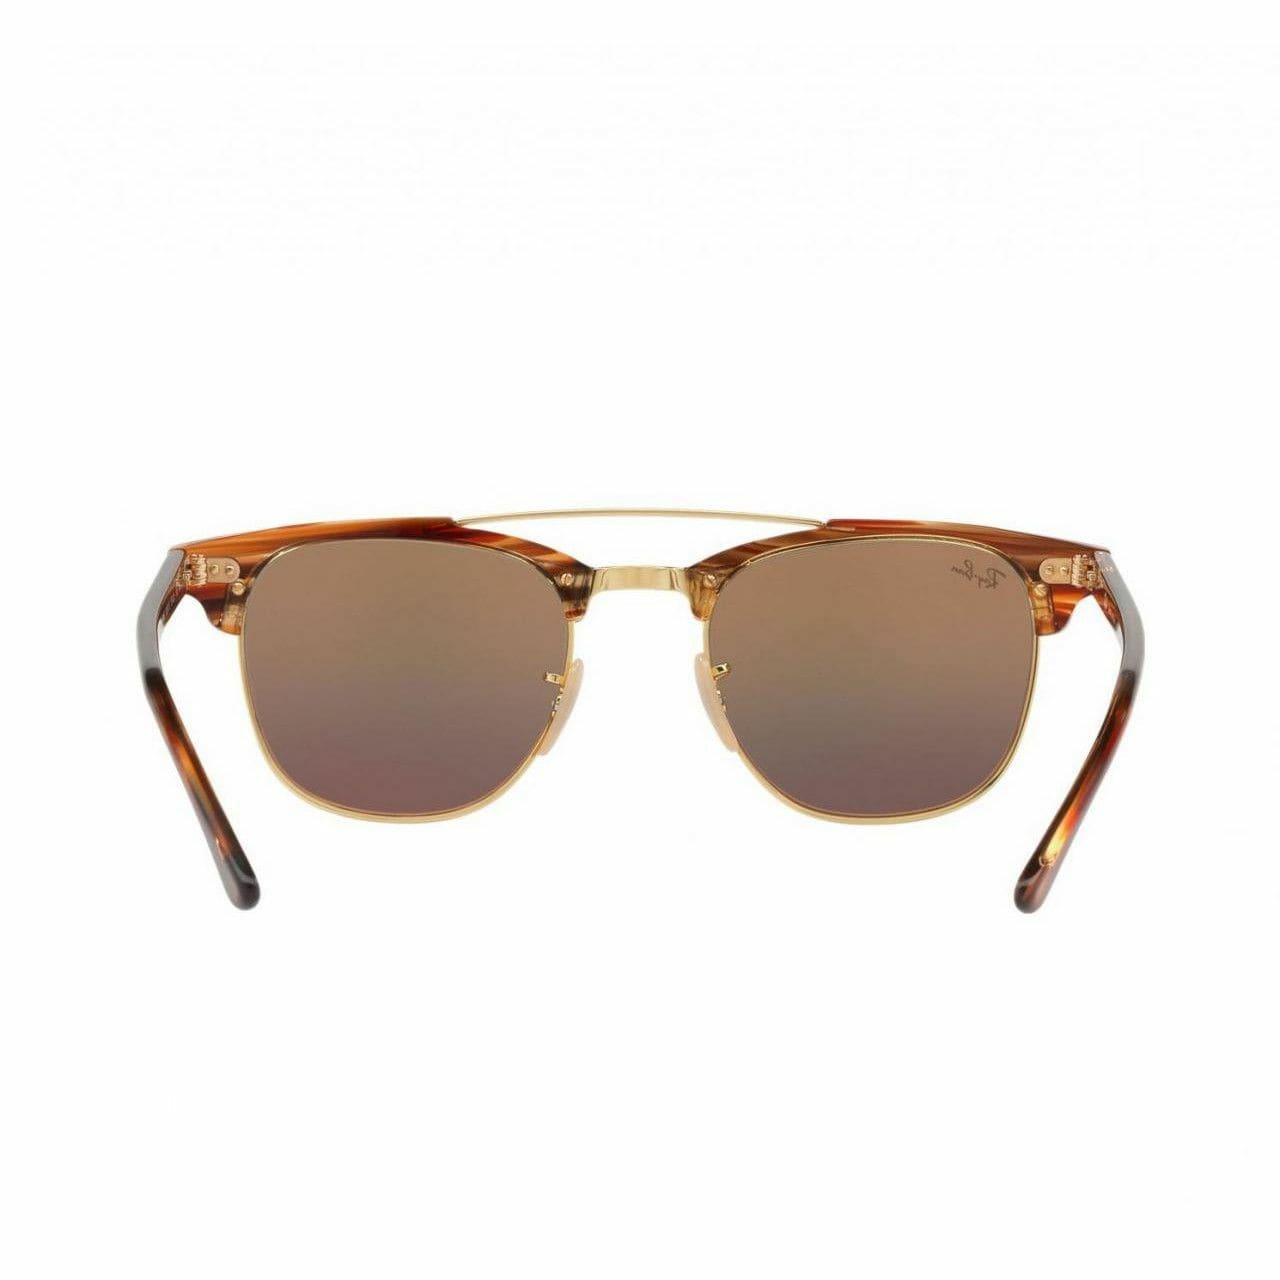 Ray-Ban RB3816-1237I1 Clubmaster Light Brown Browline Pink Gradient Mirror Lens Sunglasses 8053672851045